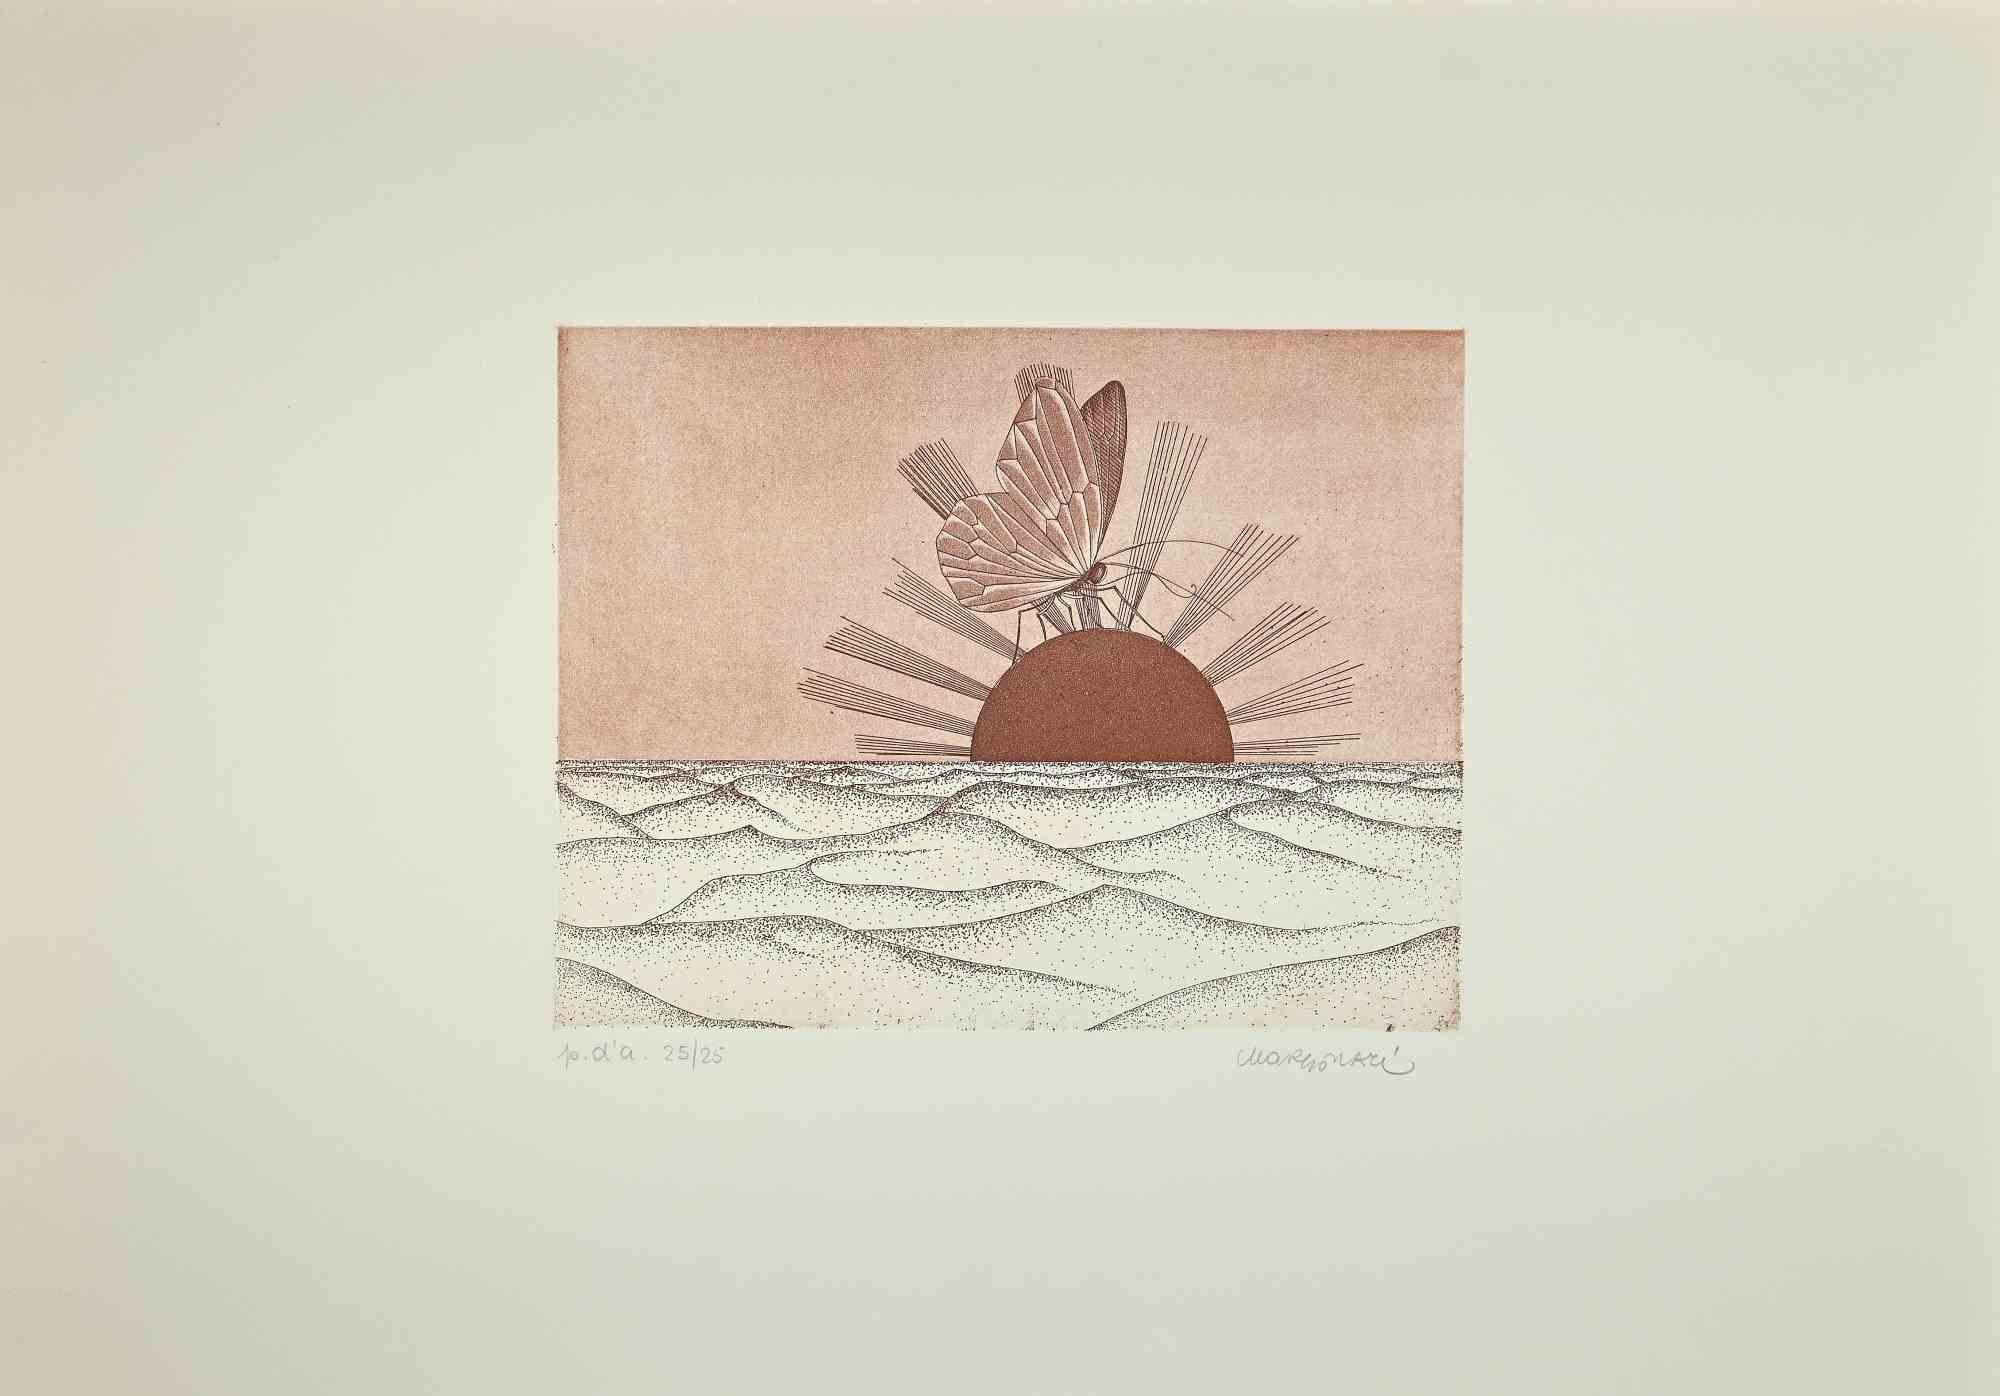 Butterfly in the Desert is an original Contemporary Artwork realized in 1980 by Renzo Margorari (Mantua, 1937).

Original Colored Etching on paper. 

Artist's Proof, from the edition of 25/25.

Hand-signed in pencil by the artist on the lower right